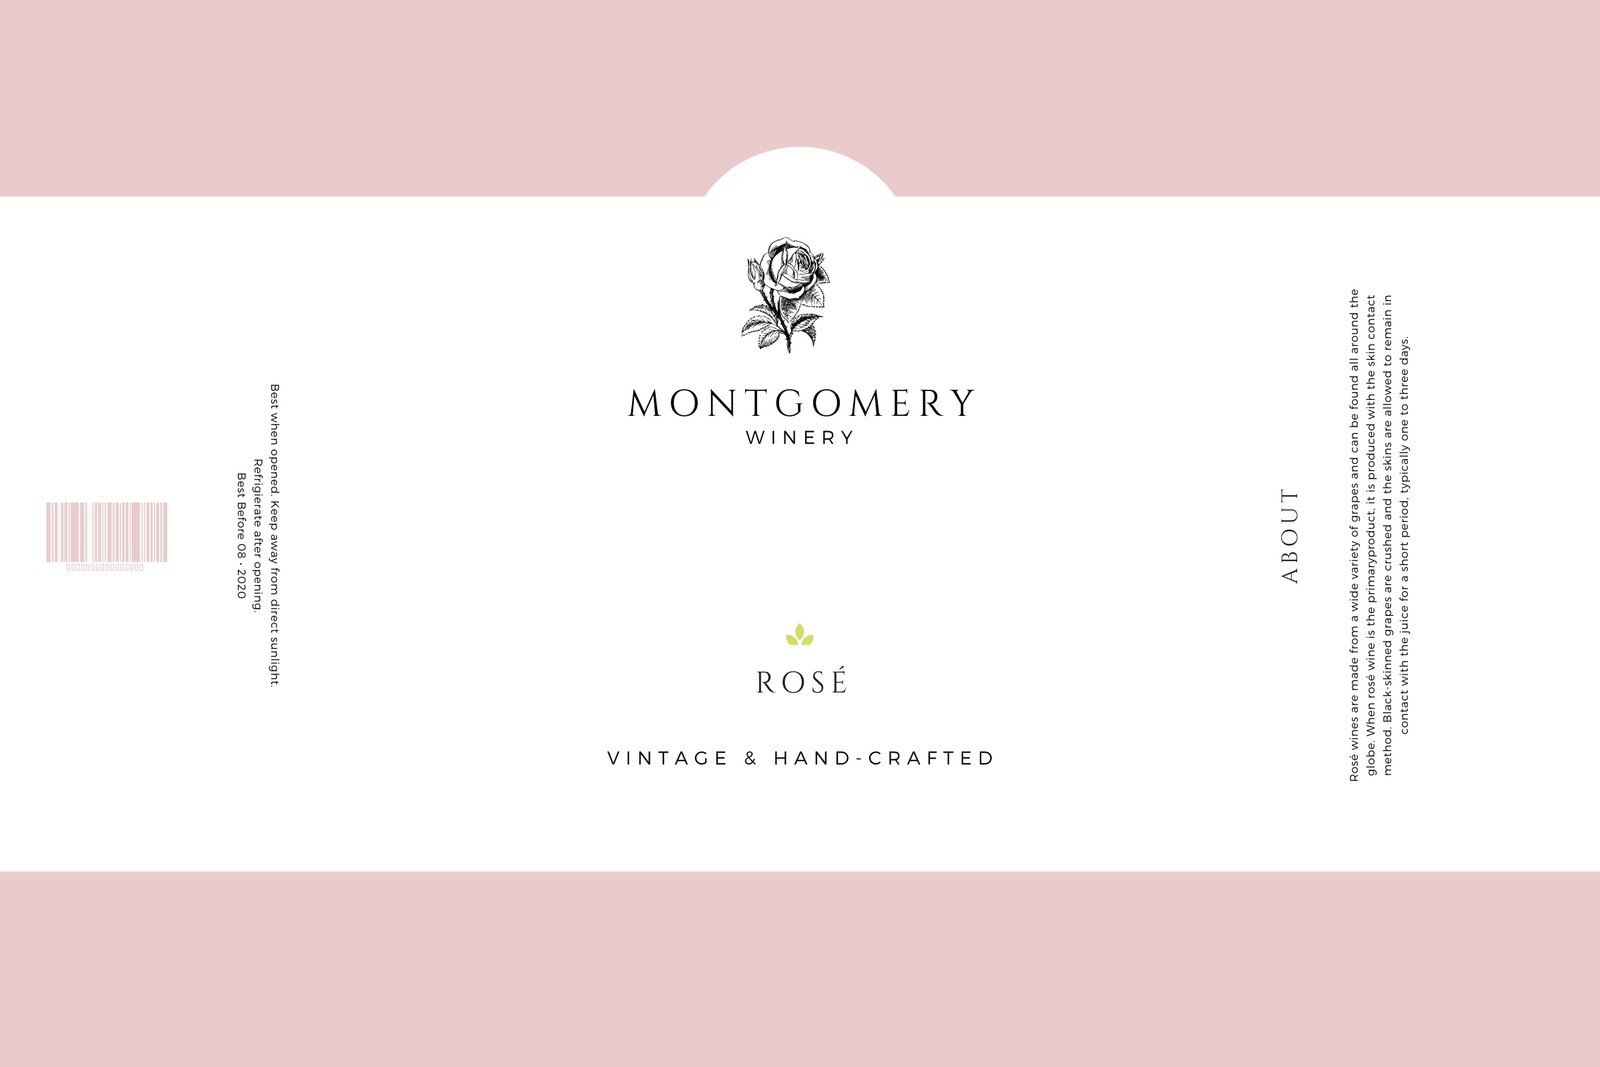 Pin by Dadada on Printable  Champagne label, Label templates, Printable  wine bottle labels